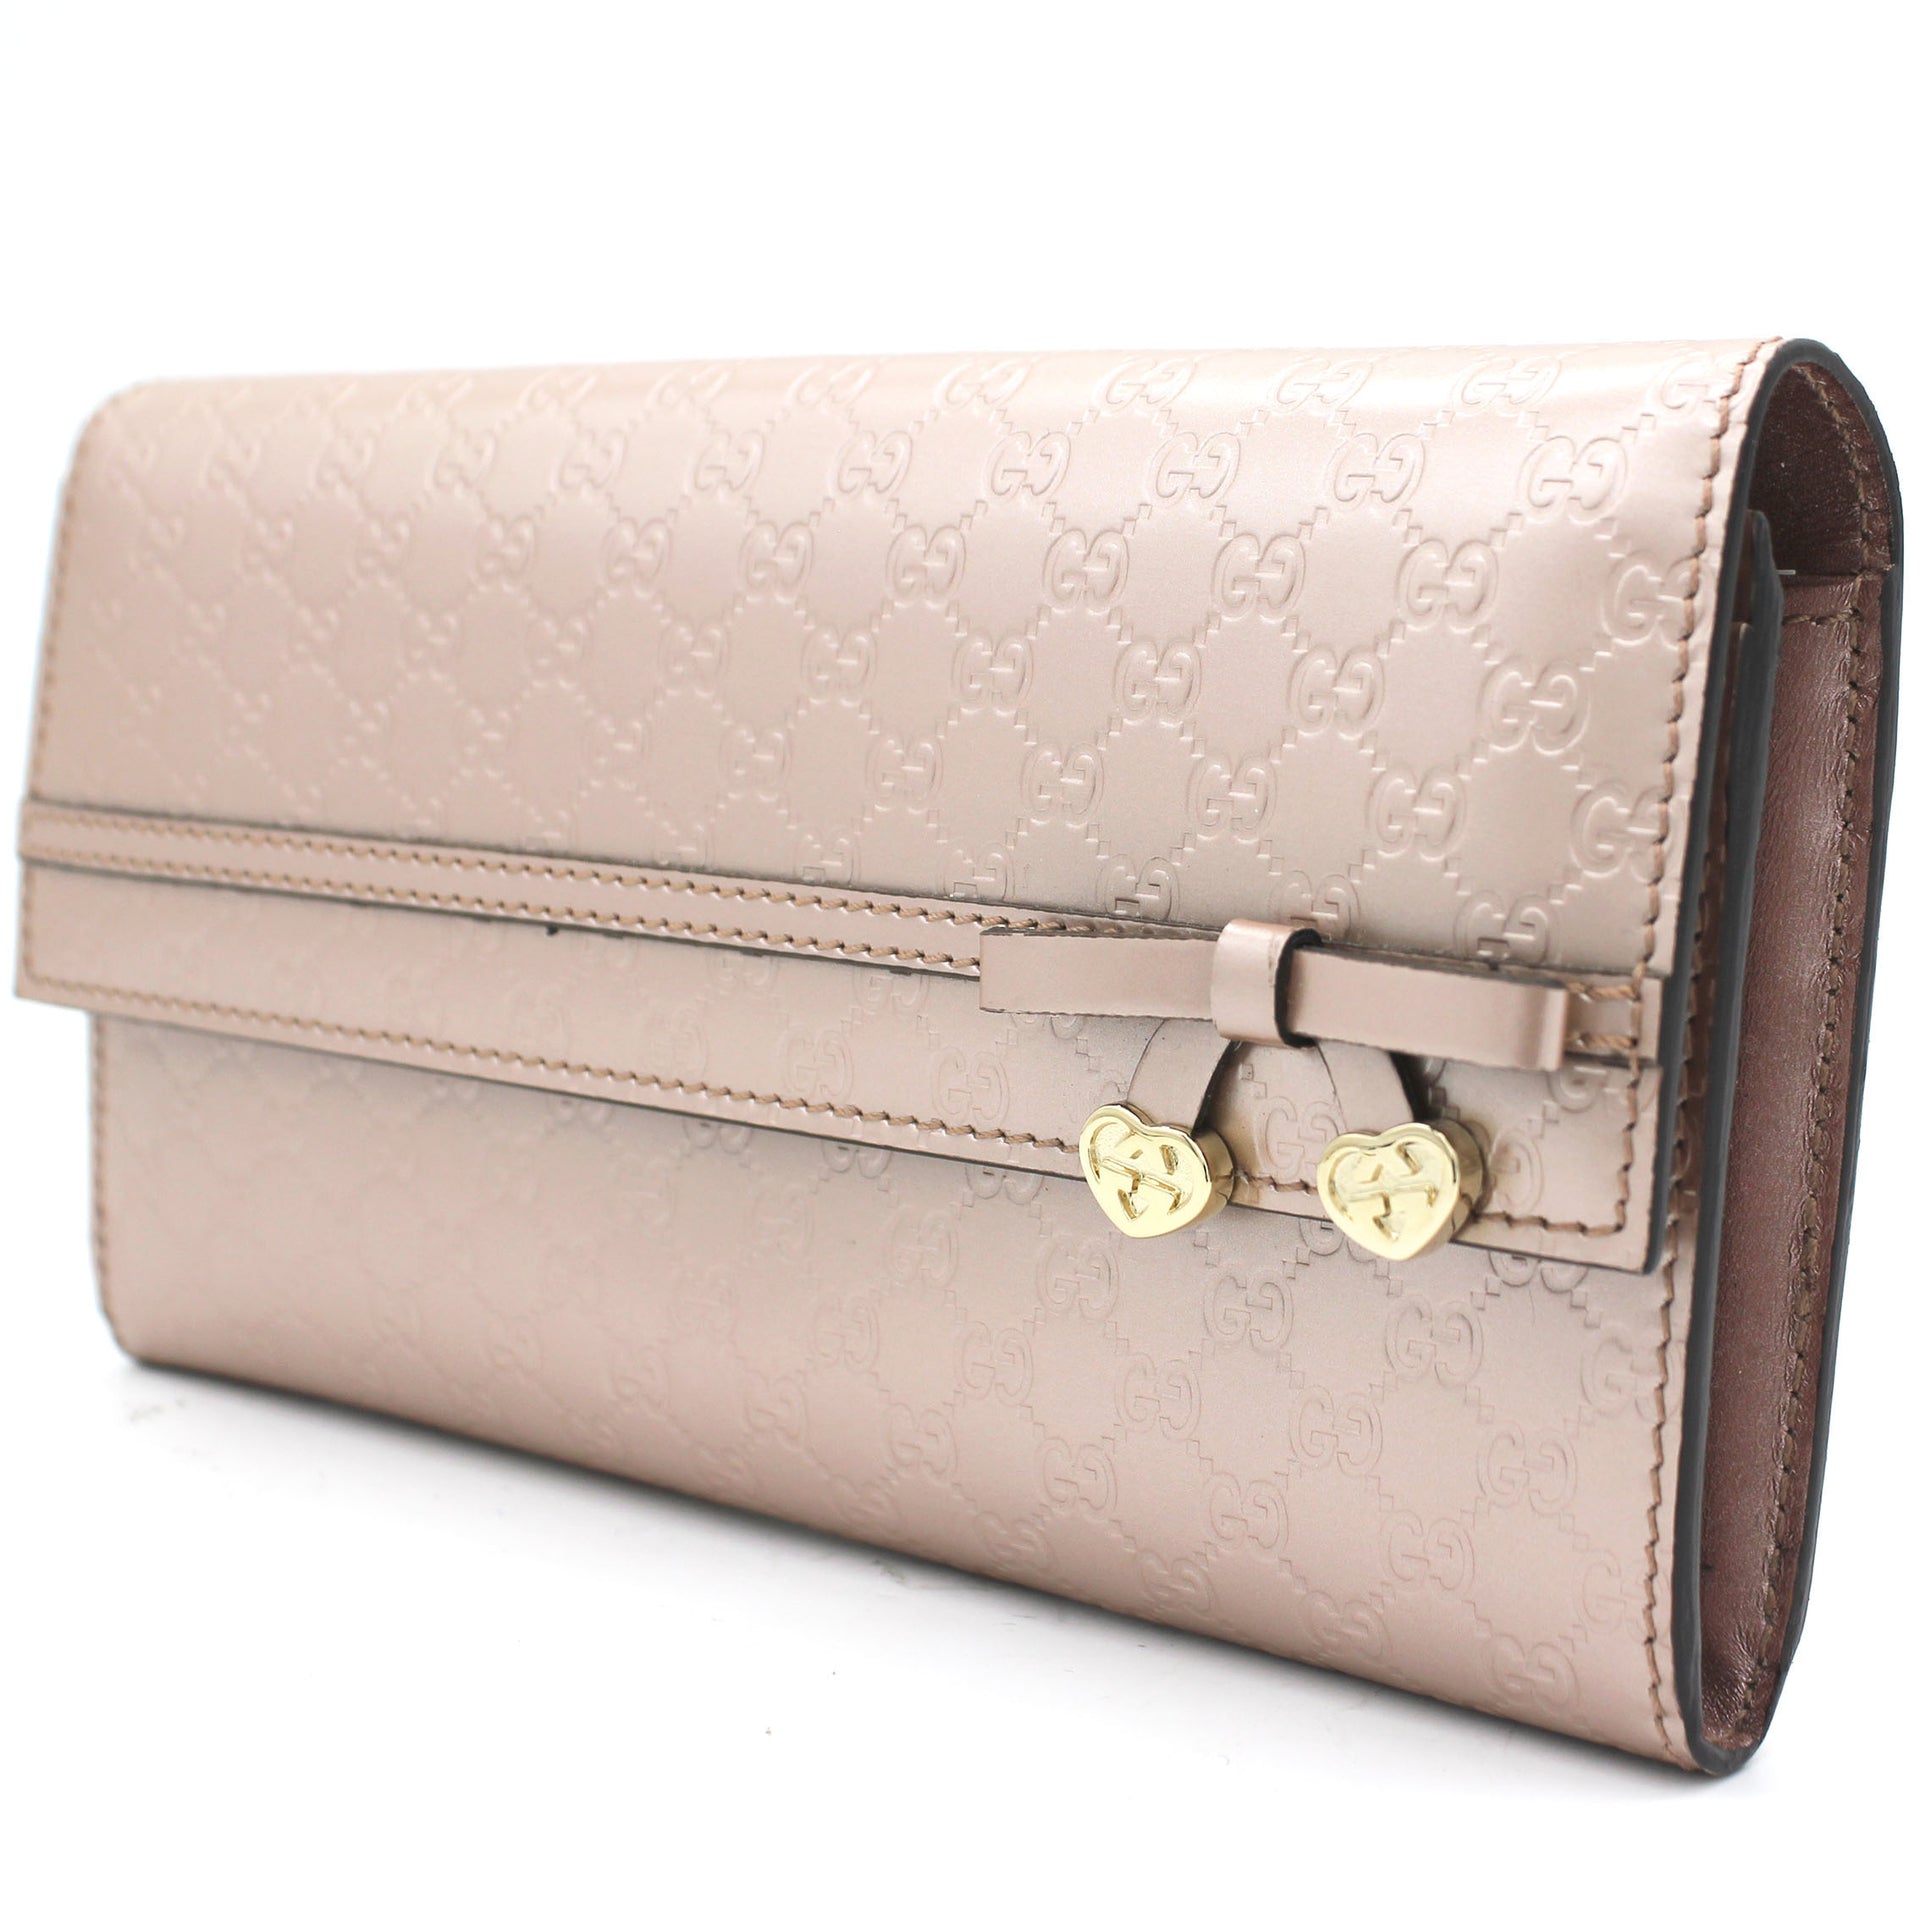 Beige Micro Guccissima Leather Continental Wallet